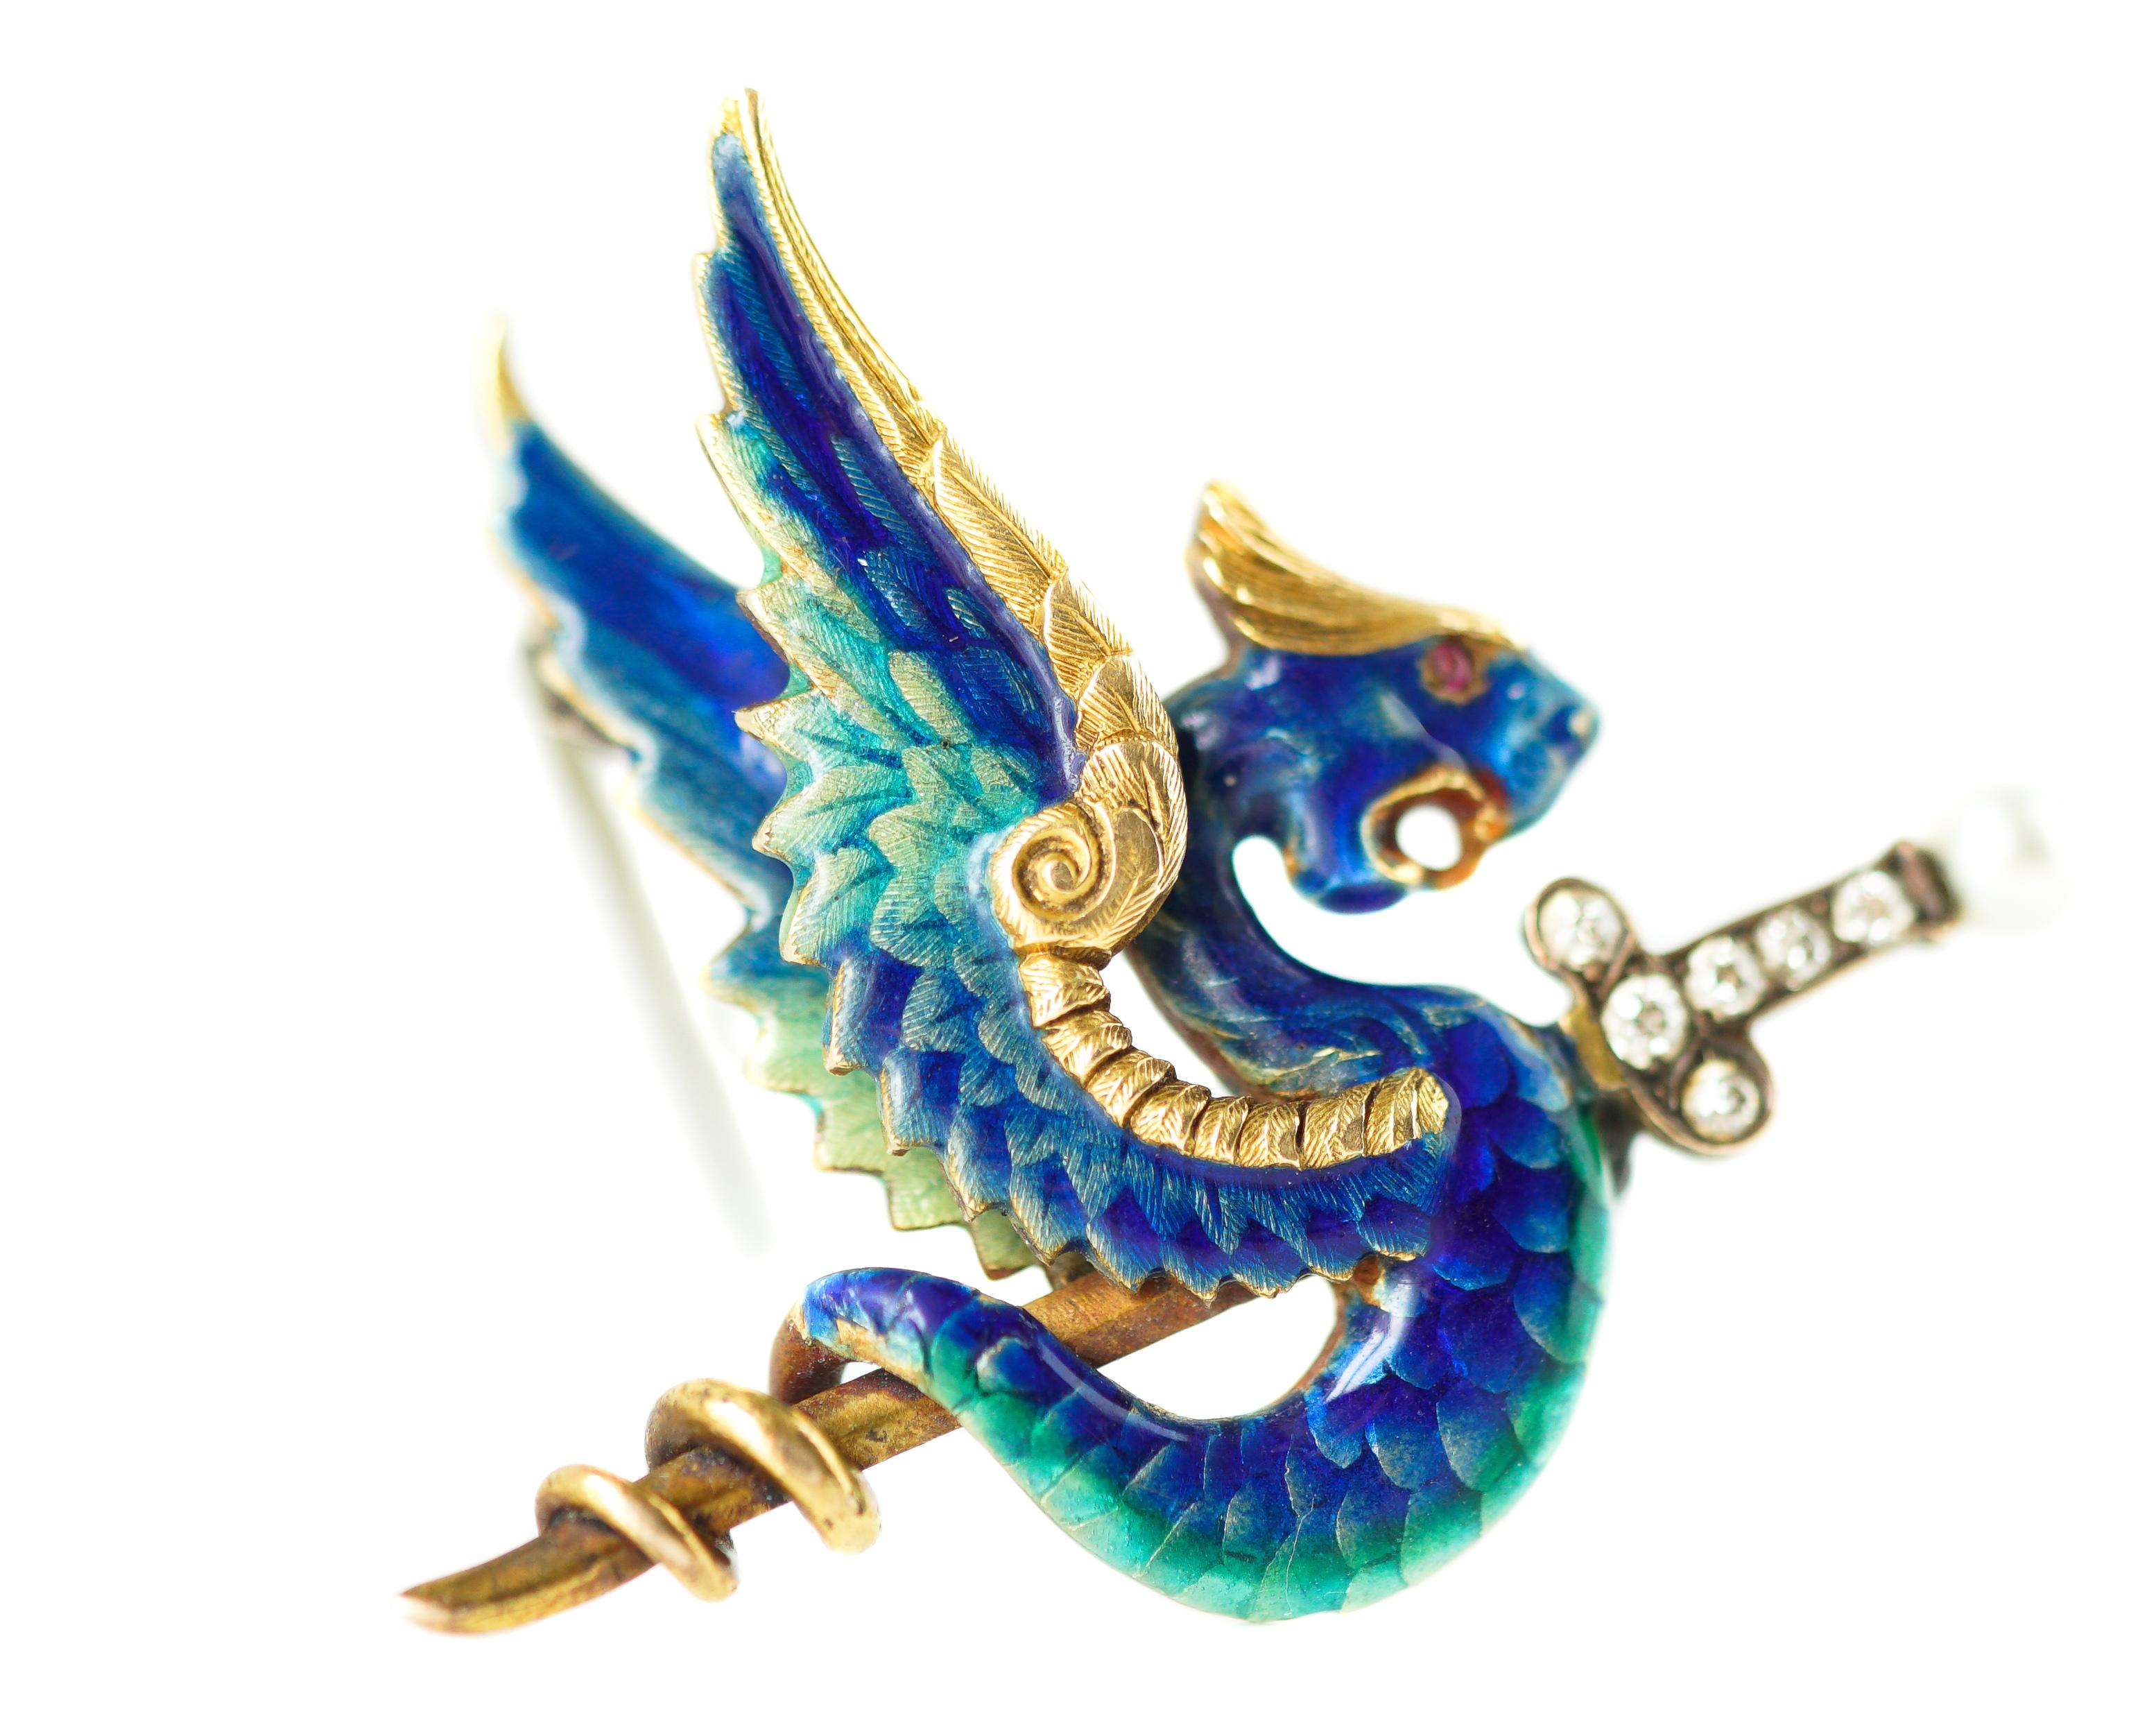 Gorgeous Enamel Dragon and Sword Pin Brooch (convertible to Pendant) crafted in 14 karat Yellow Gold, Enamel, Diamonds, Seed Pearl

Features:
2 Winged Dragon with Serpent Tail carrying a Long Sword
Stunning Mediterranean Blue, Teal and Green Enamel